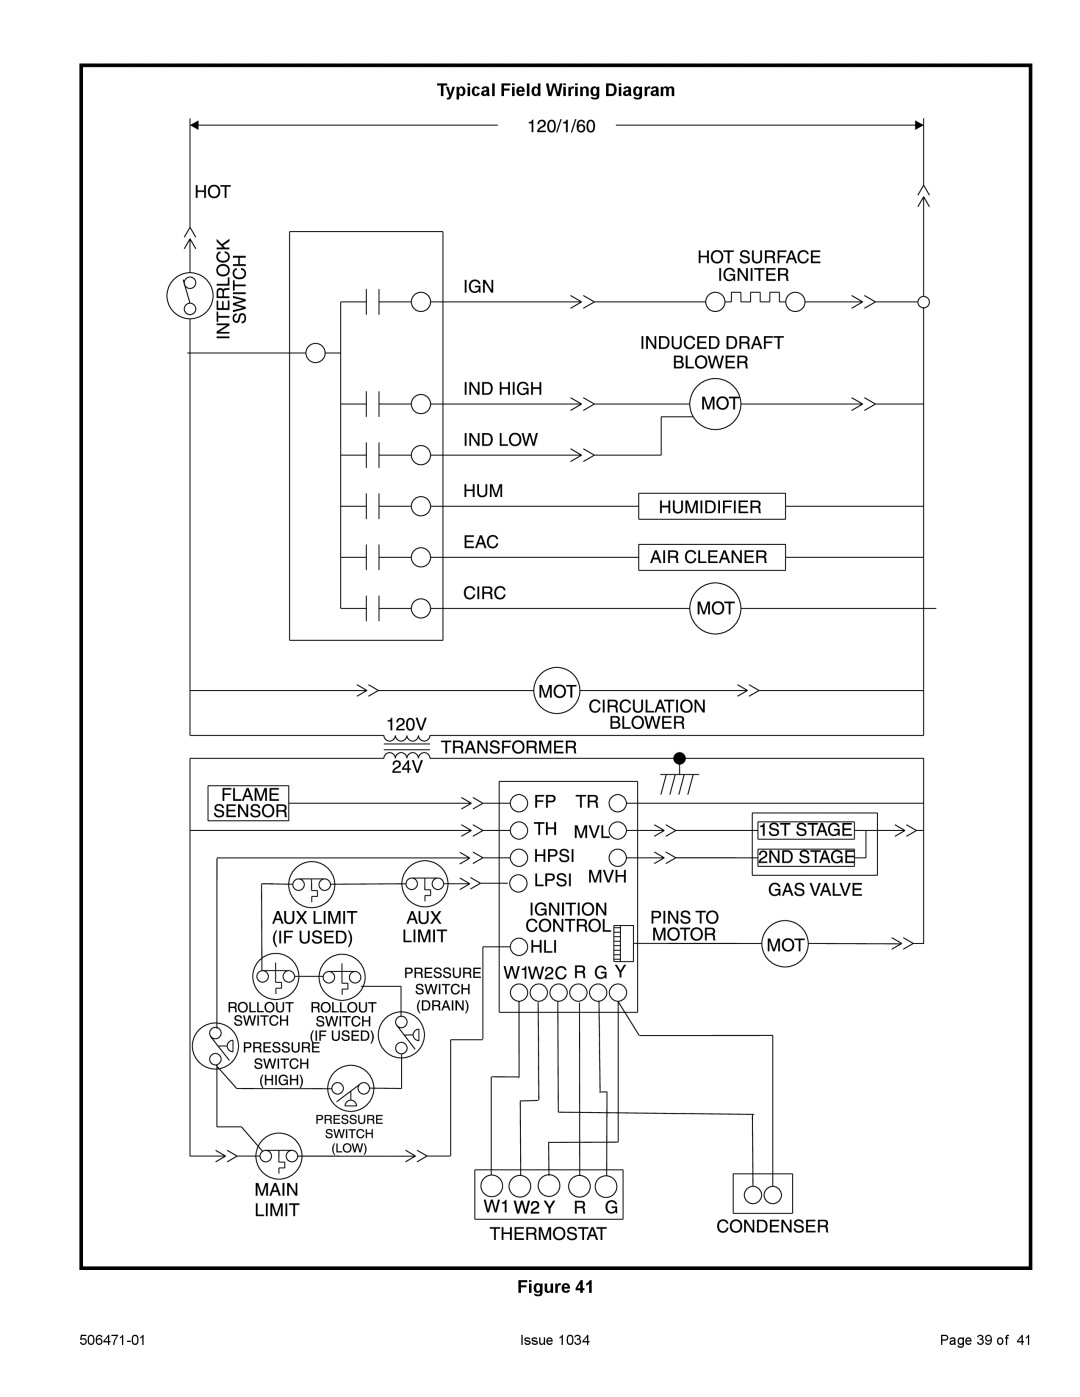 Allied Air Enterprises 80G1UH2V, A80UH2V Typical Field Wiring Diagram, Issue, Page 39 of, 506471-01 